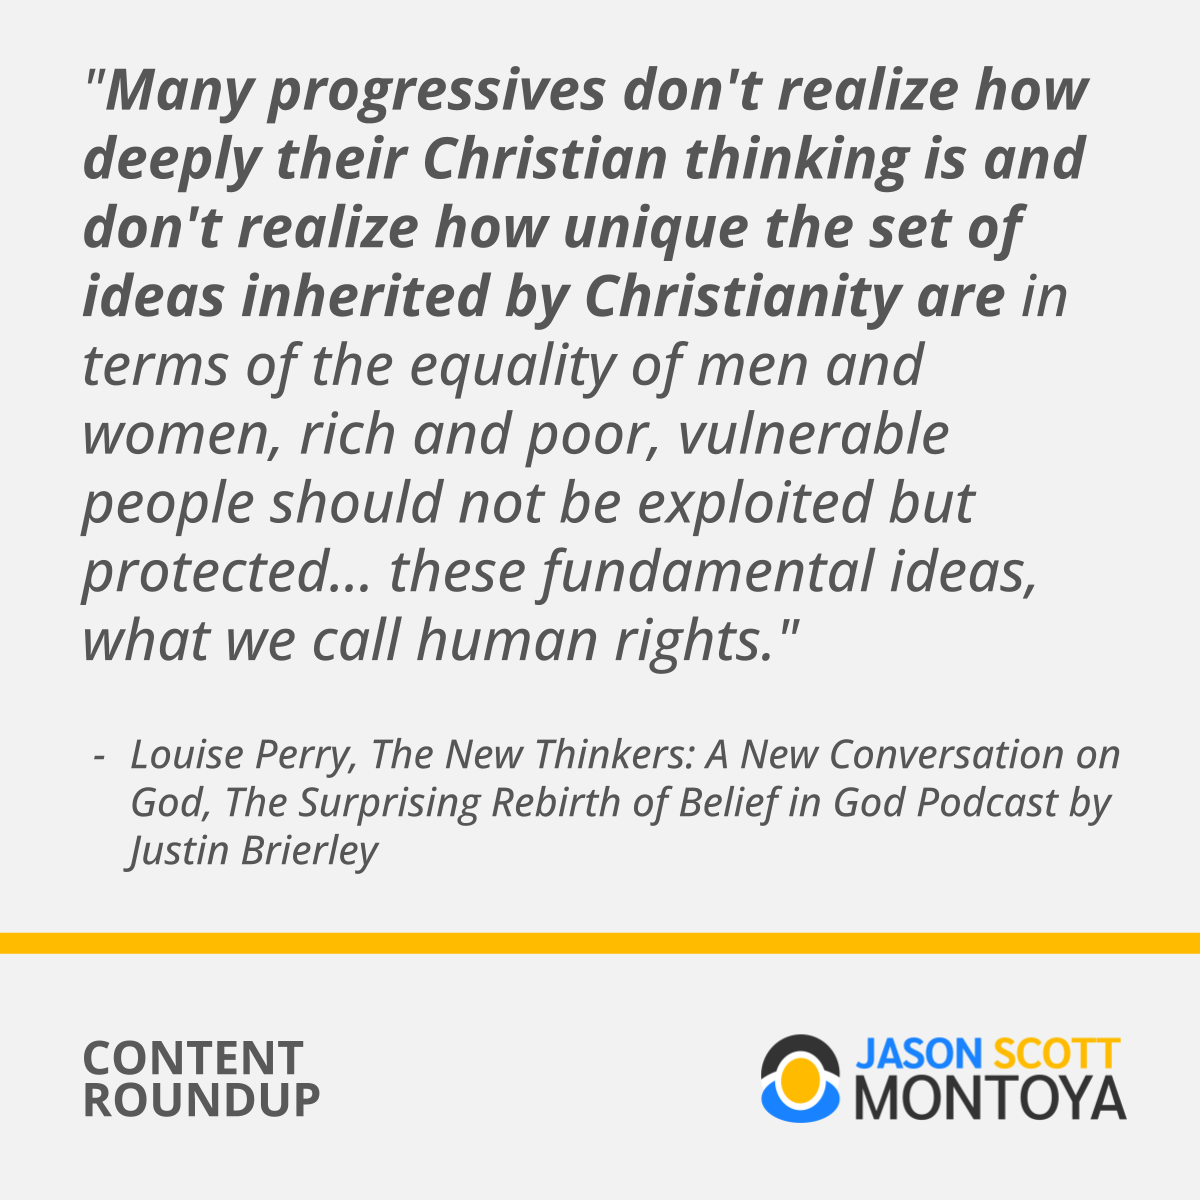 "Many progressives don't realize how deeply their Christian thinking is and don't realize how unique the set of ideas inherited by Christianity are in terms of the equality of men and women, rich and poor, vulnerable people should not be exploited but protected... these fundamental ideas, what we call human rights."  Louise Perry, The New Thinkers: A New Conversation on God, The Surprising Rebirth of Belief in God Podcast by Justin Brierley